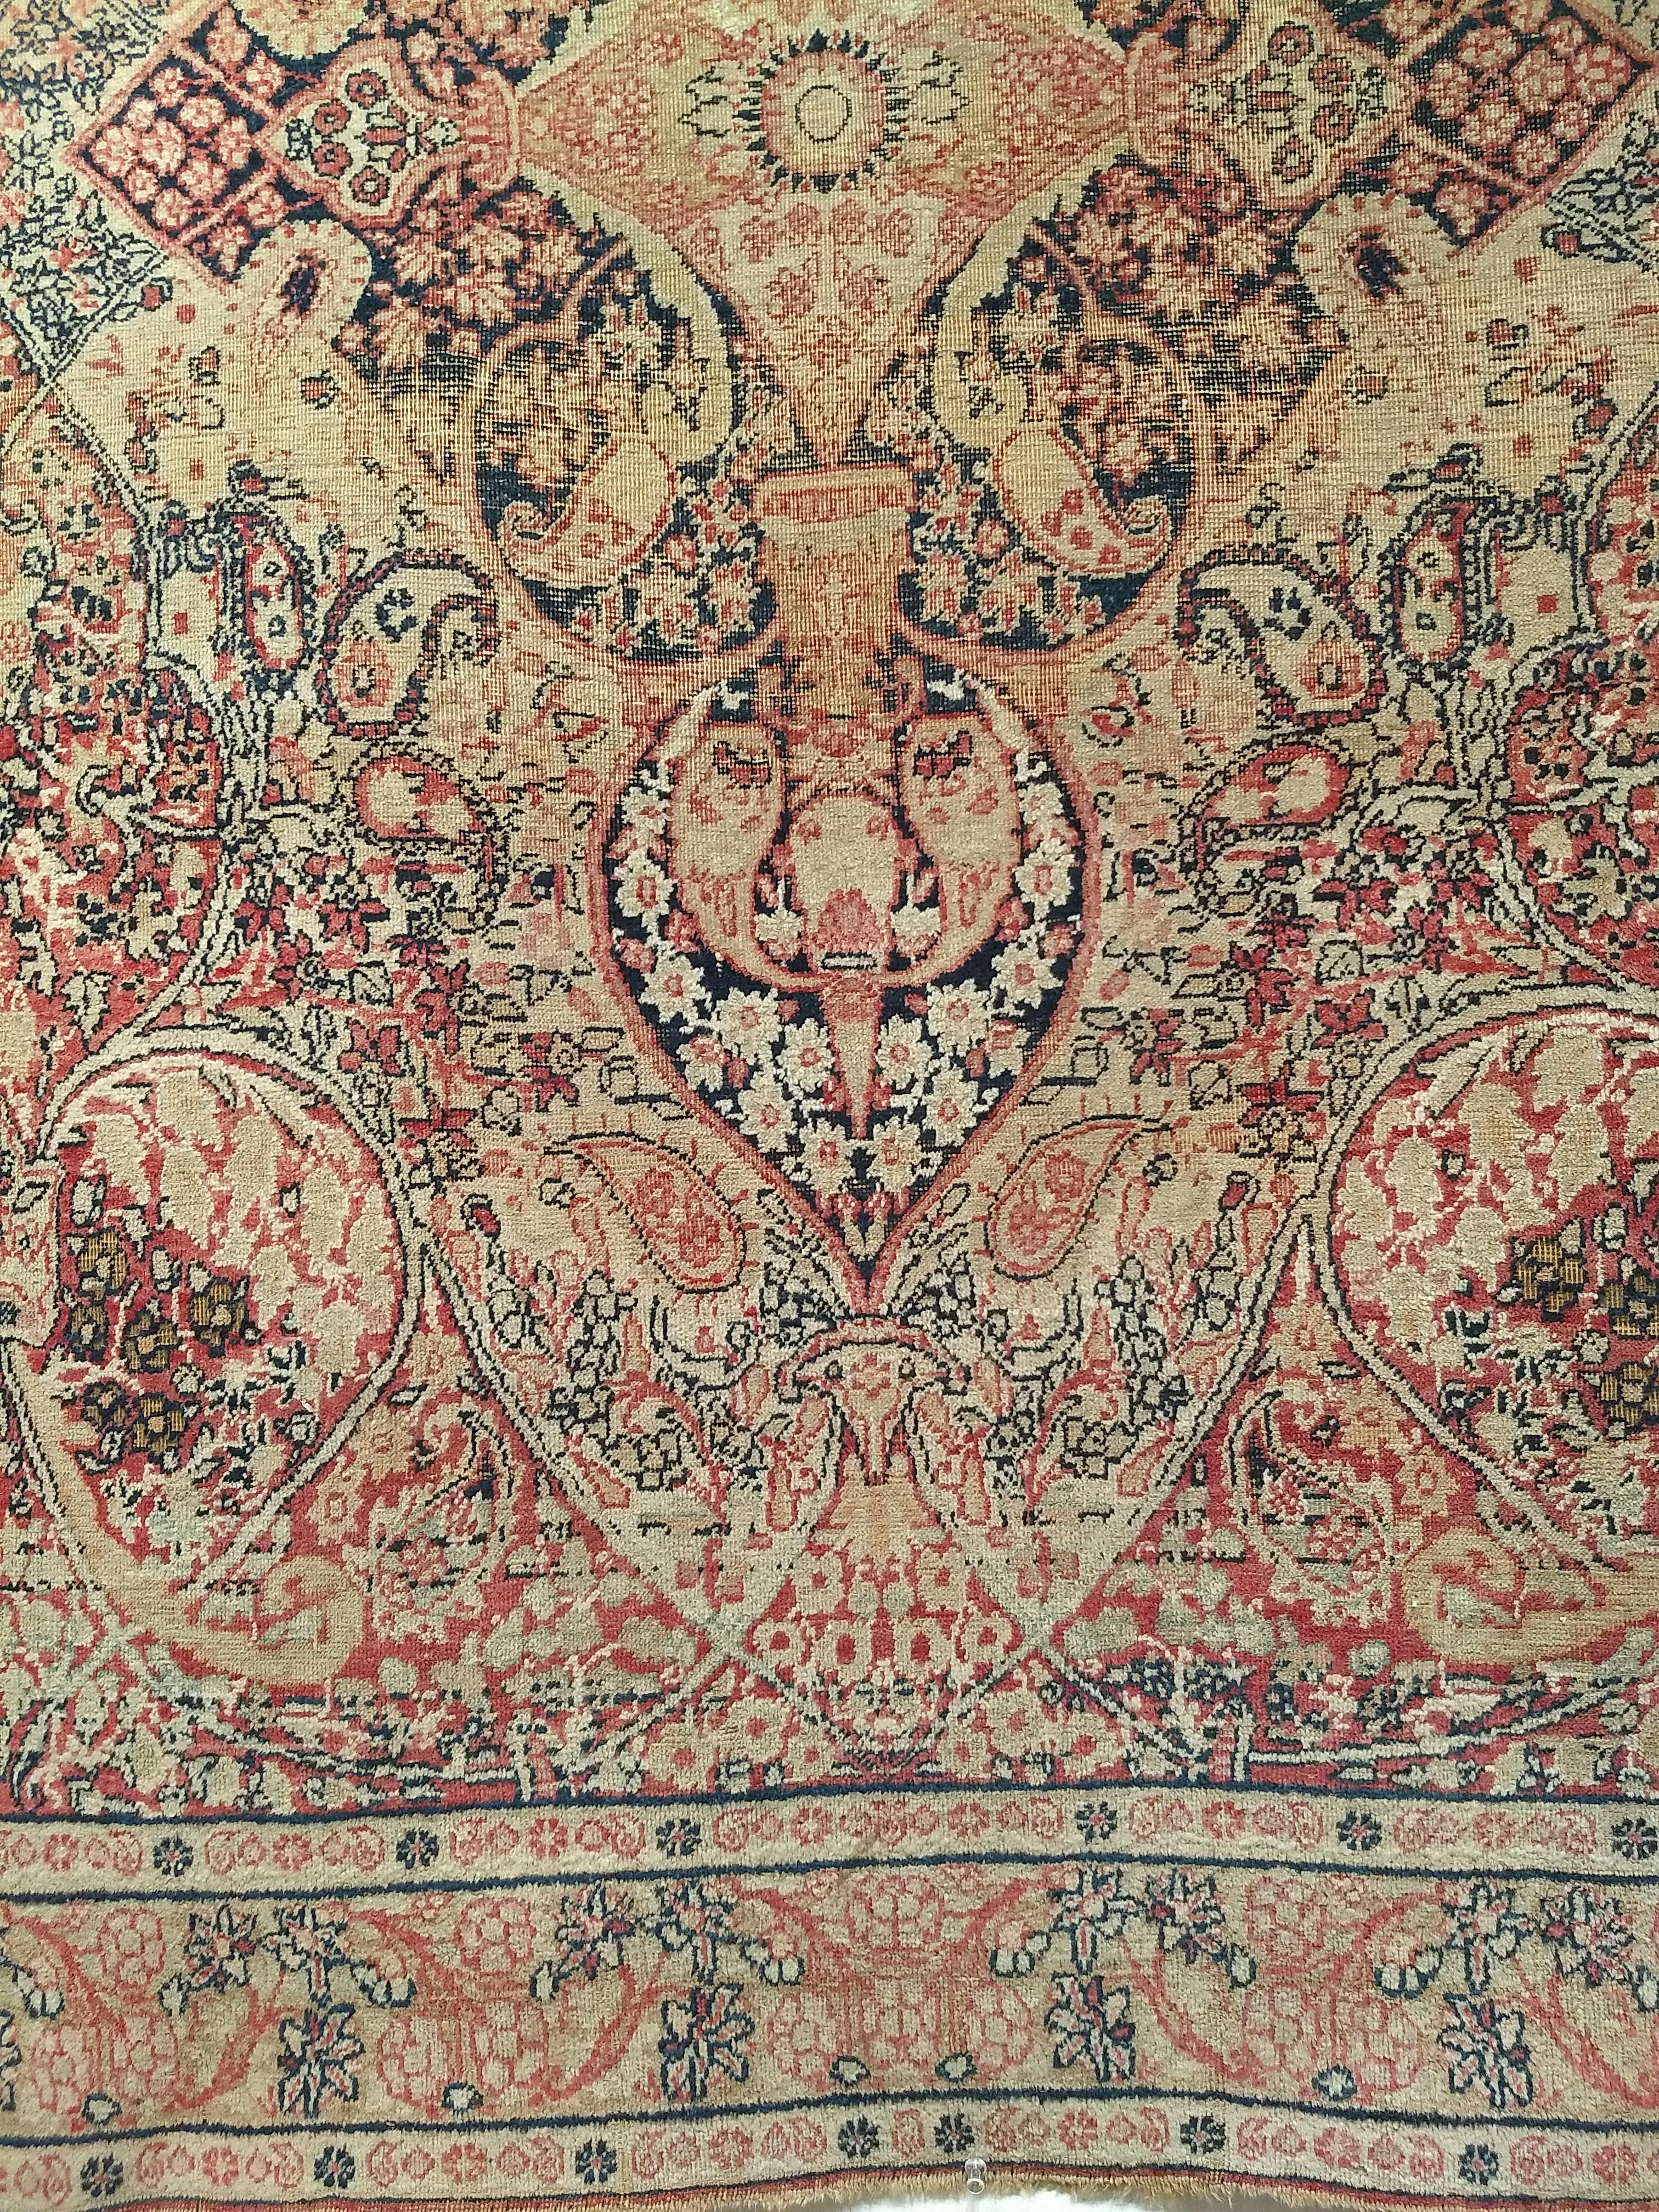 Wool 19th Century Persian Kerman Lavar in Medallion Pattern in Pale Yellow, Red, Blue For Sale